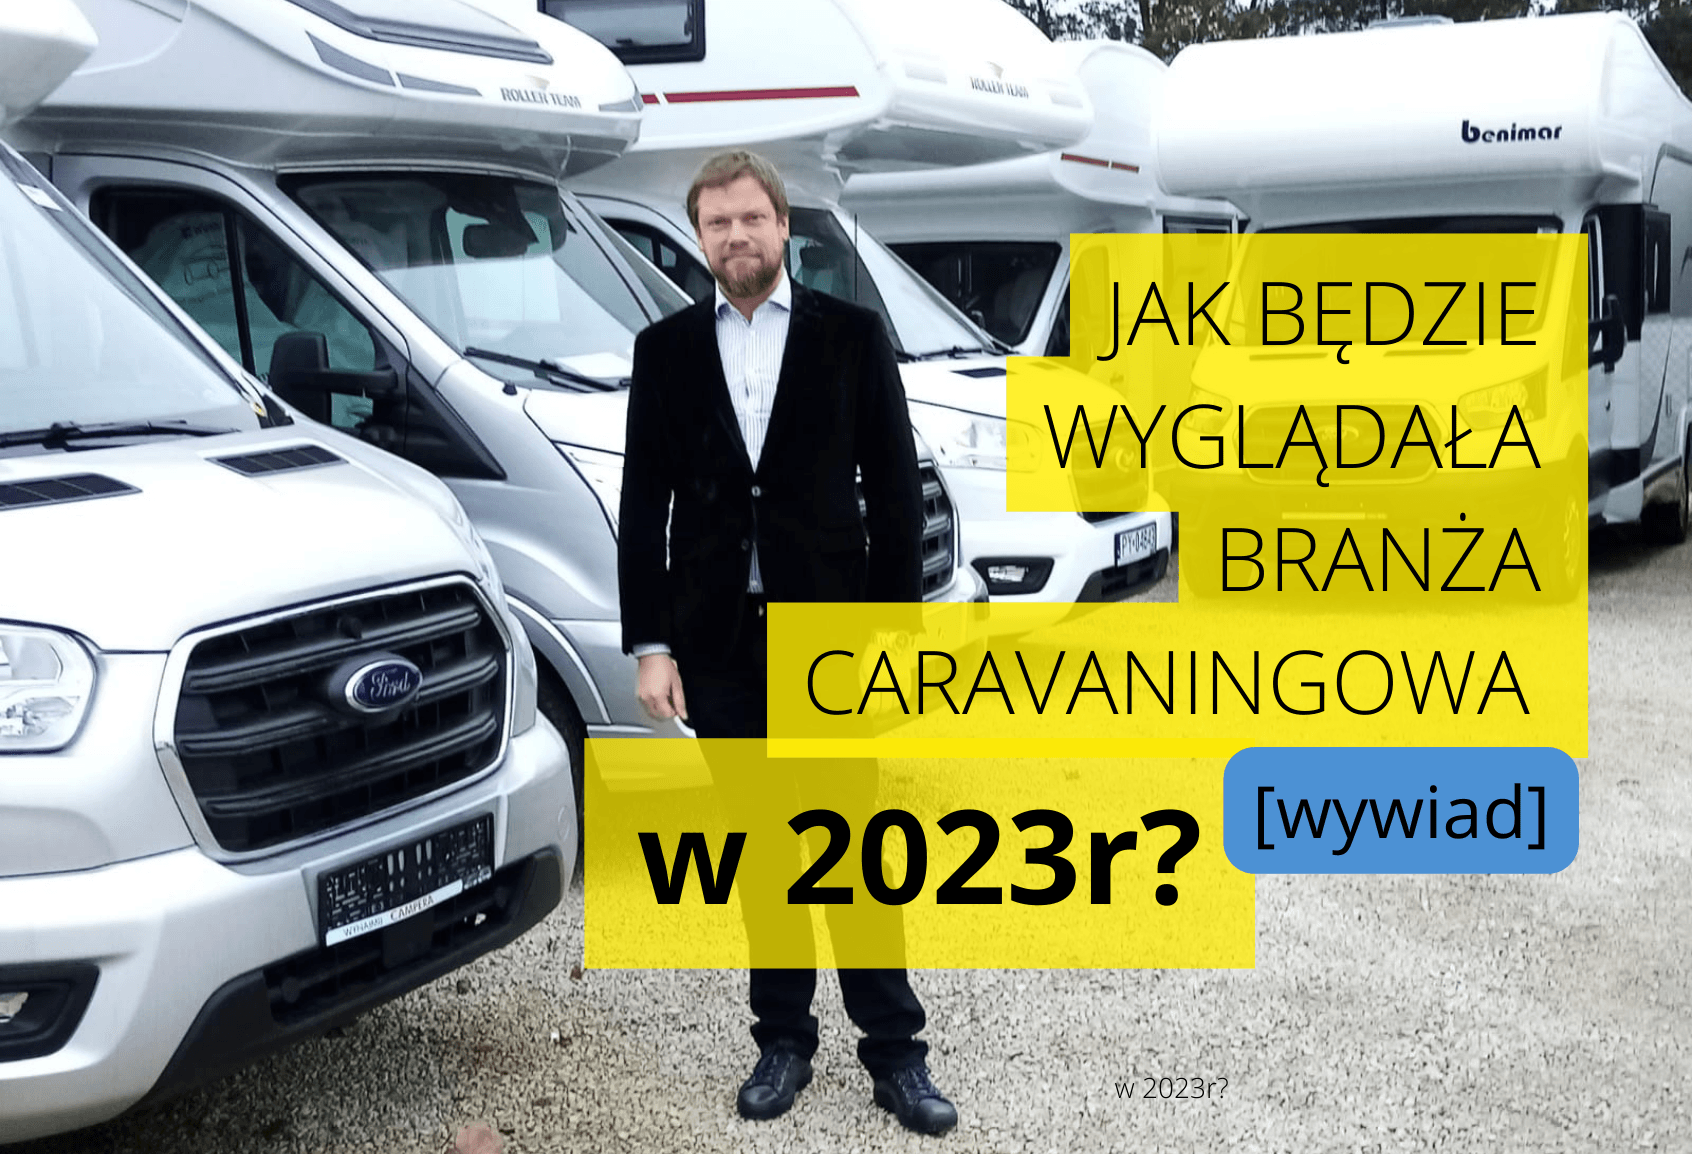 The condition of the caravanning industry in the eyes of Łukasz Złotnicki - [interview] – main image